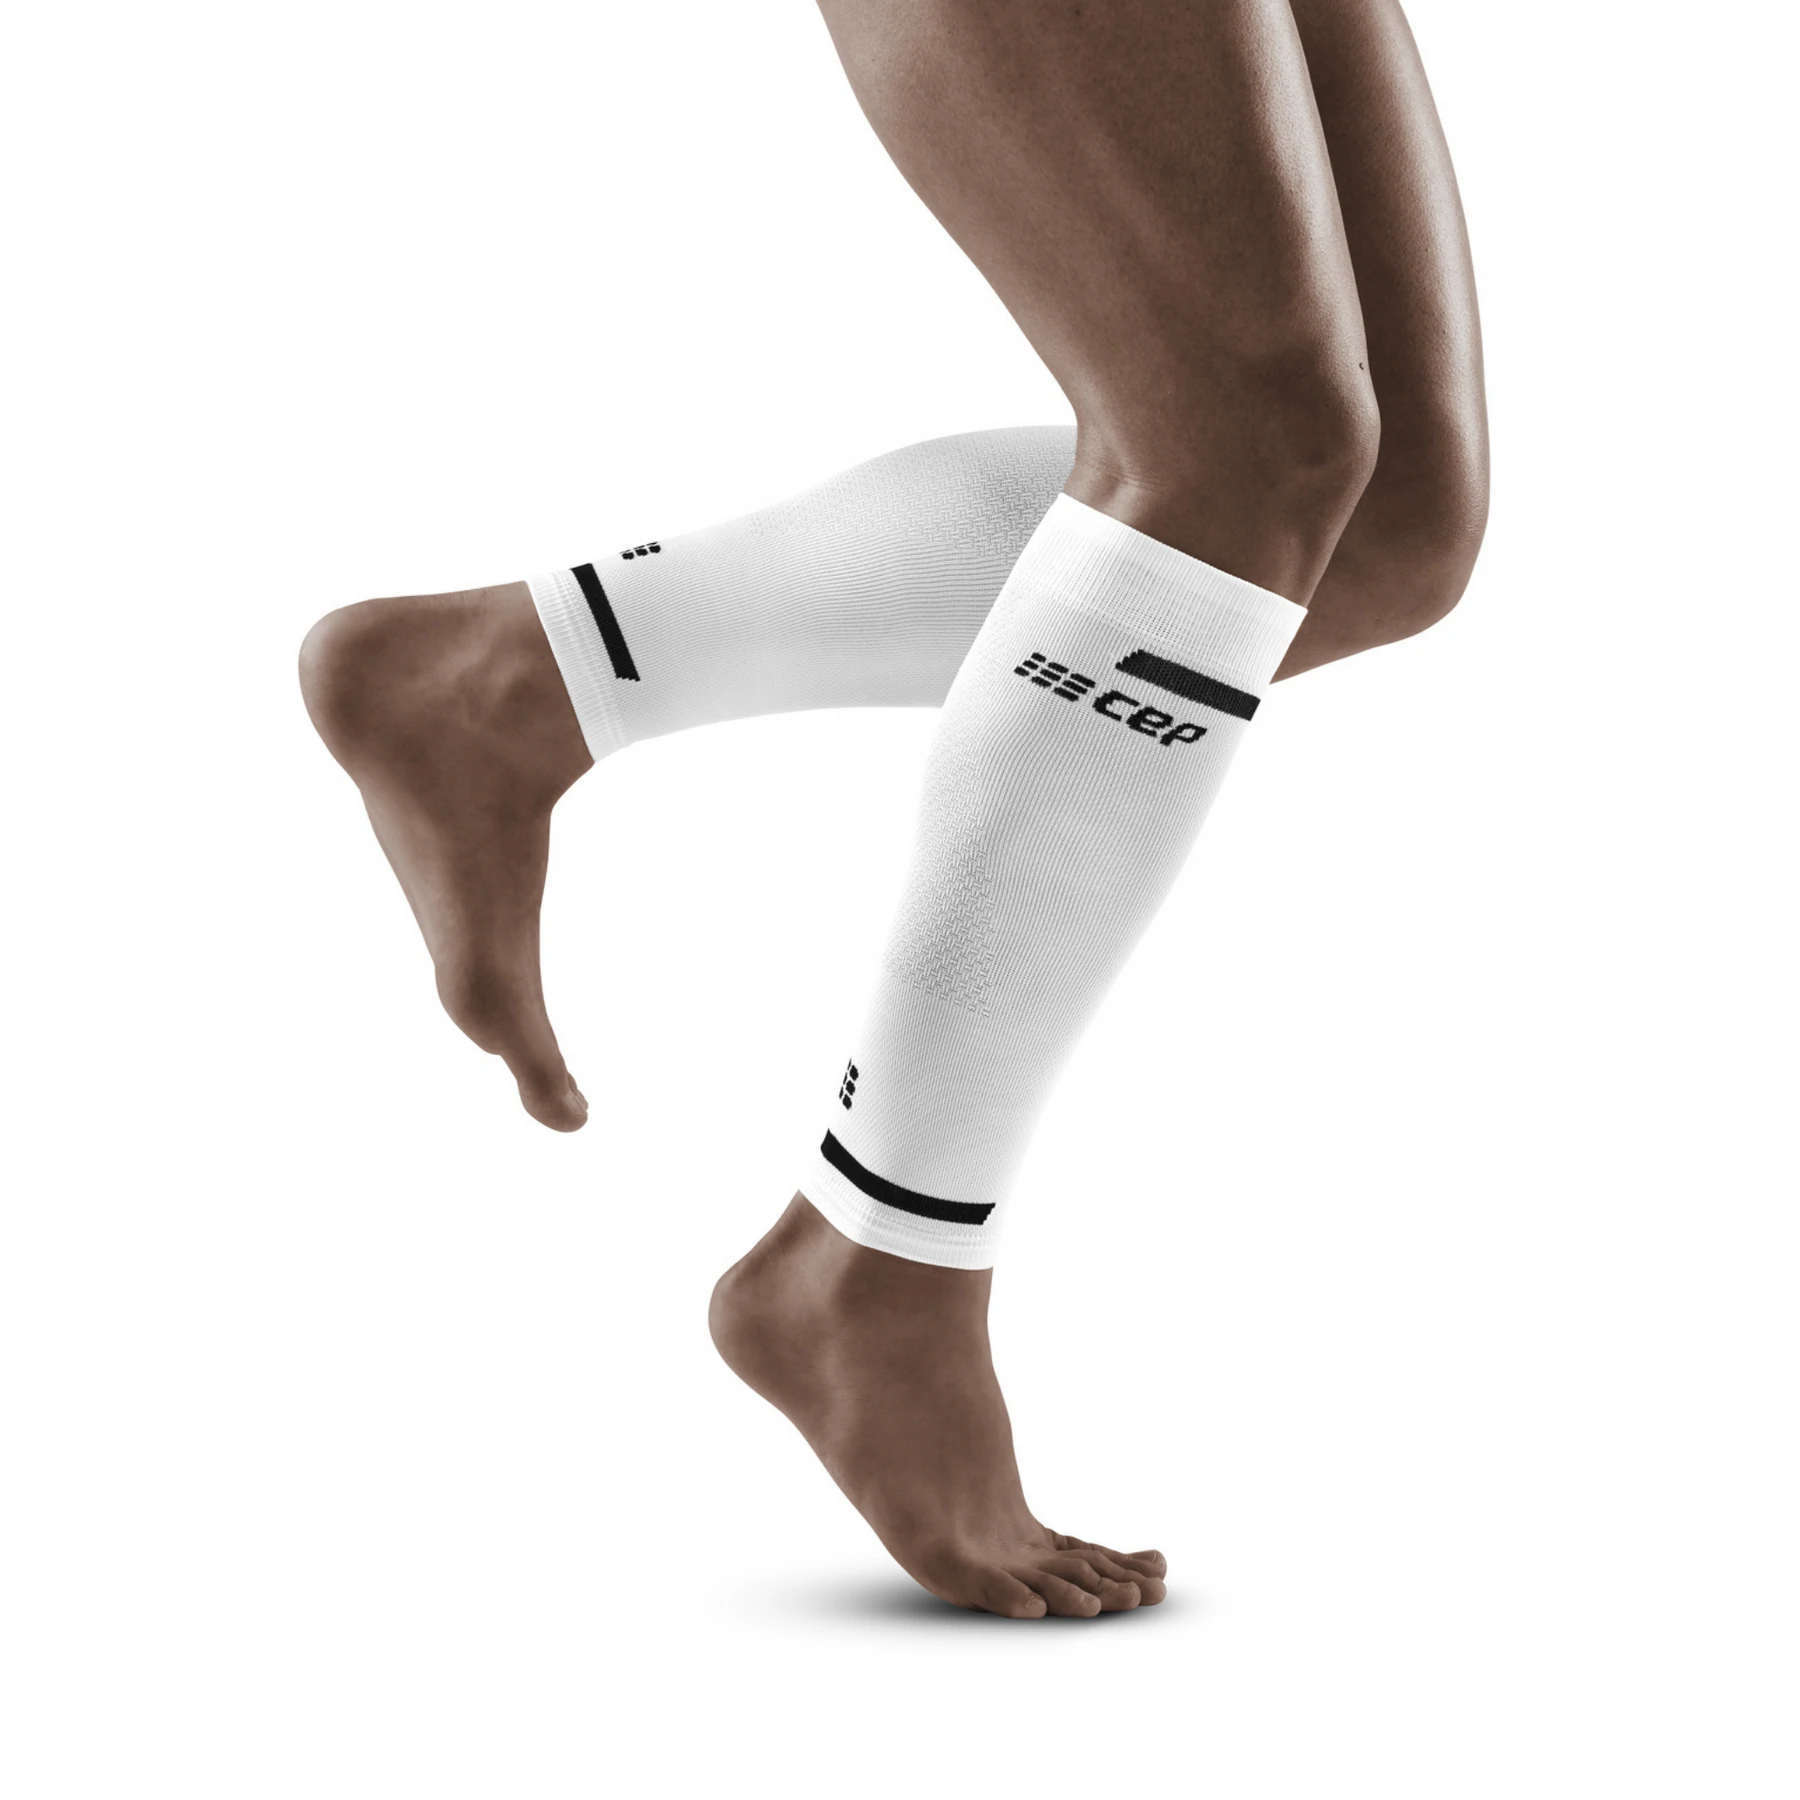 CEP Men's Compression Calf Sleeves 4.0